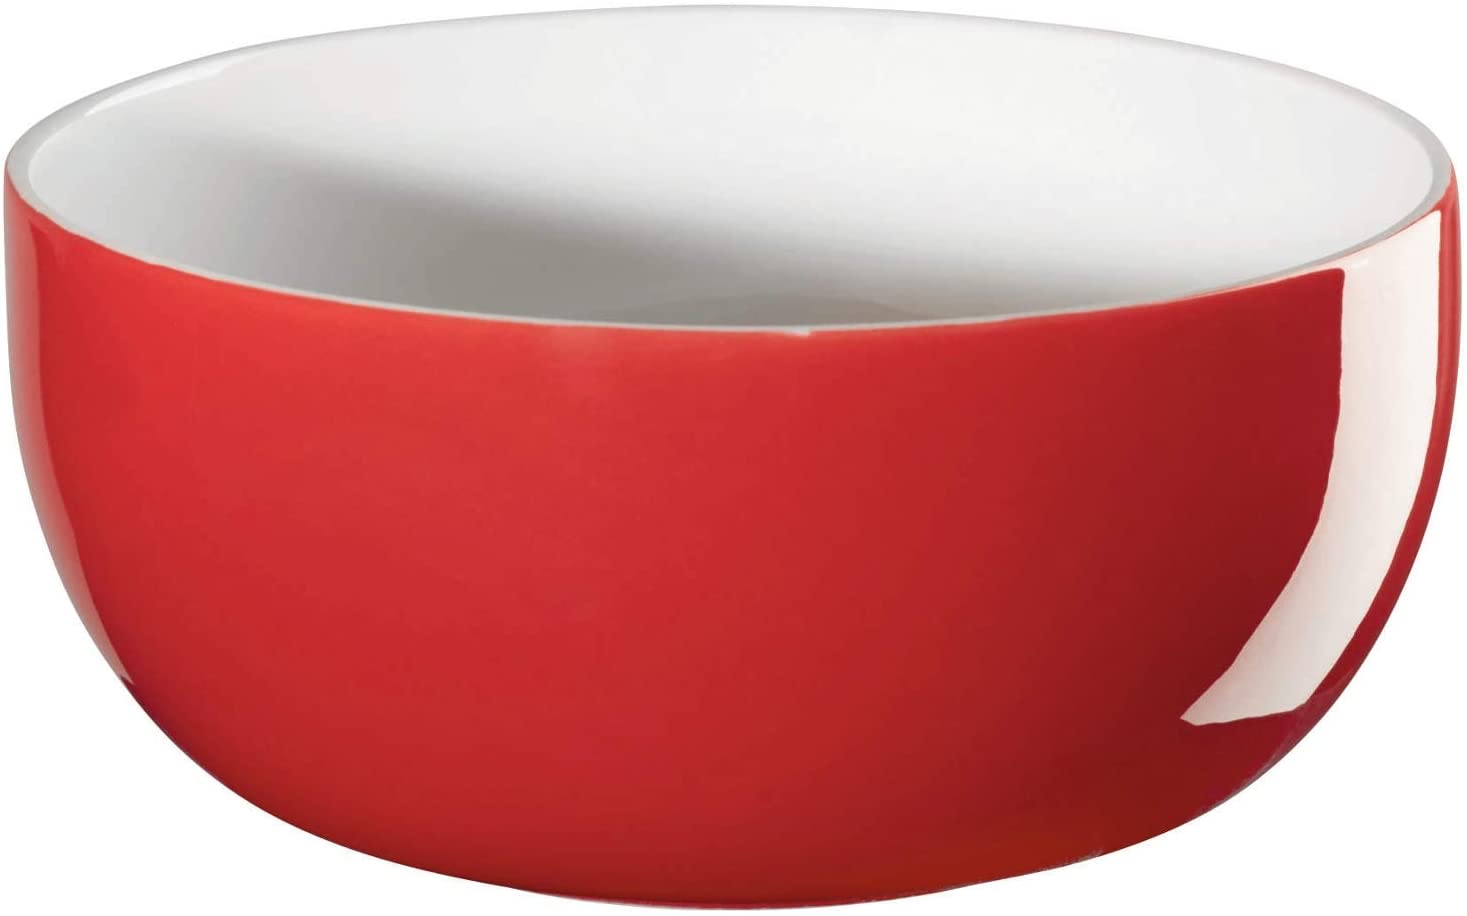 ASA 19500069 COPPA Cereal Bowl Red 6.5 cm (Pack of 1)